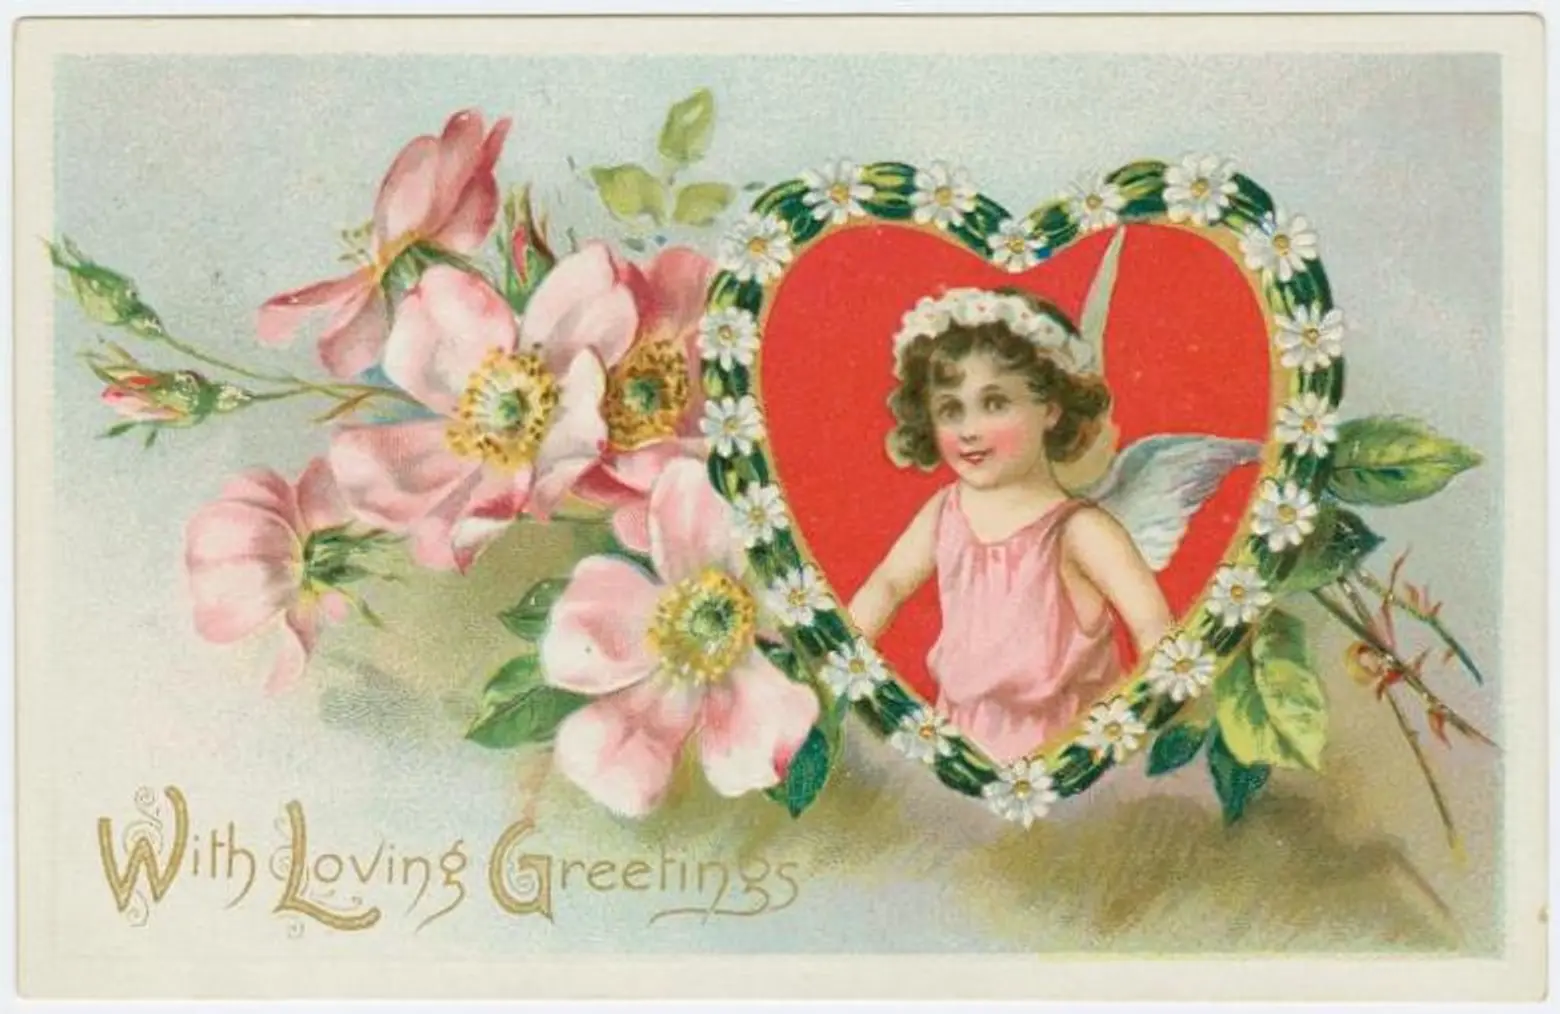 These early 20th-century Valentine’s Day cards are delightfully bizarre